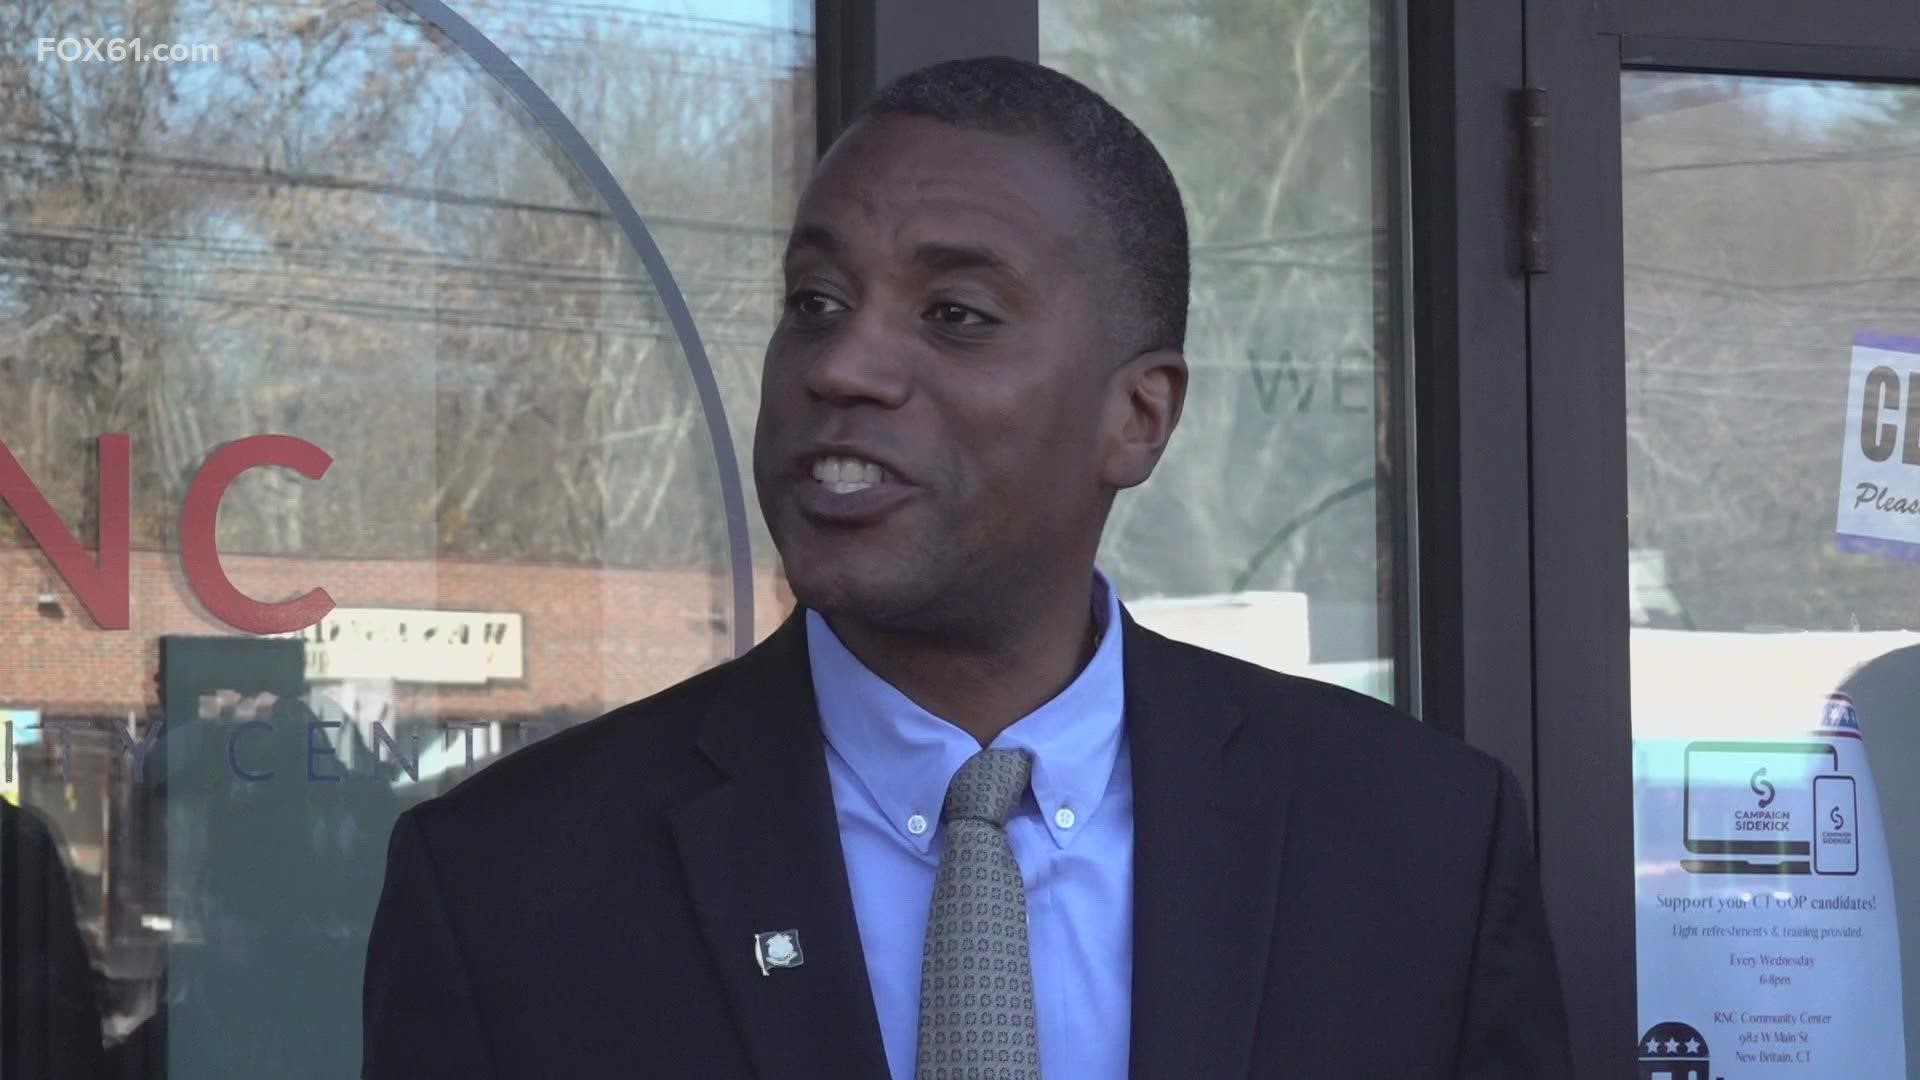 On Thursday, George Logan conceded his race for the 5th Congressional district to Jahana Hayes.